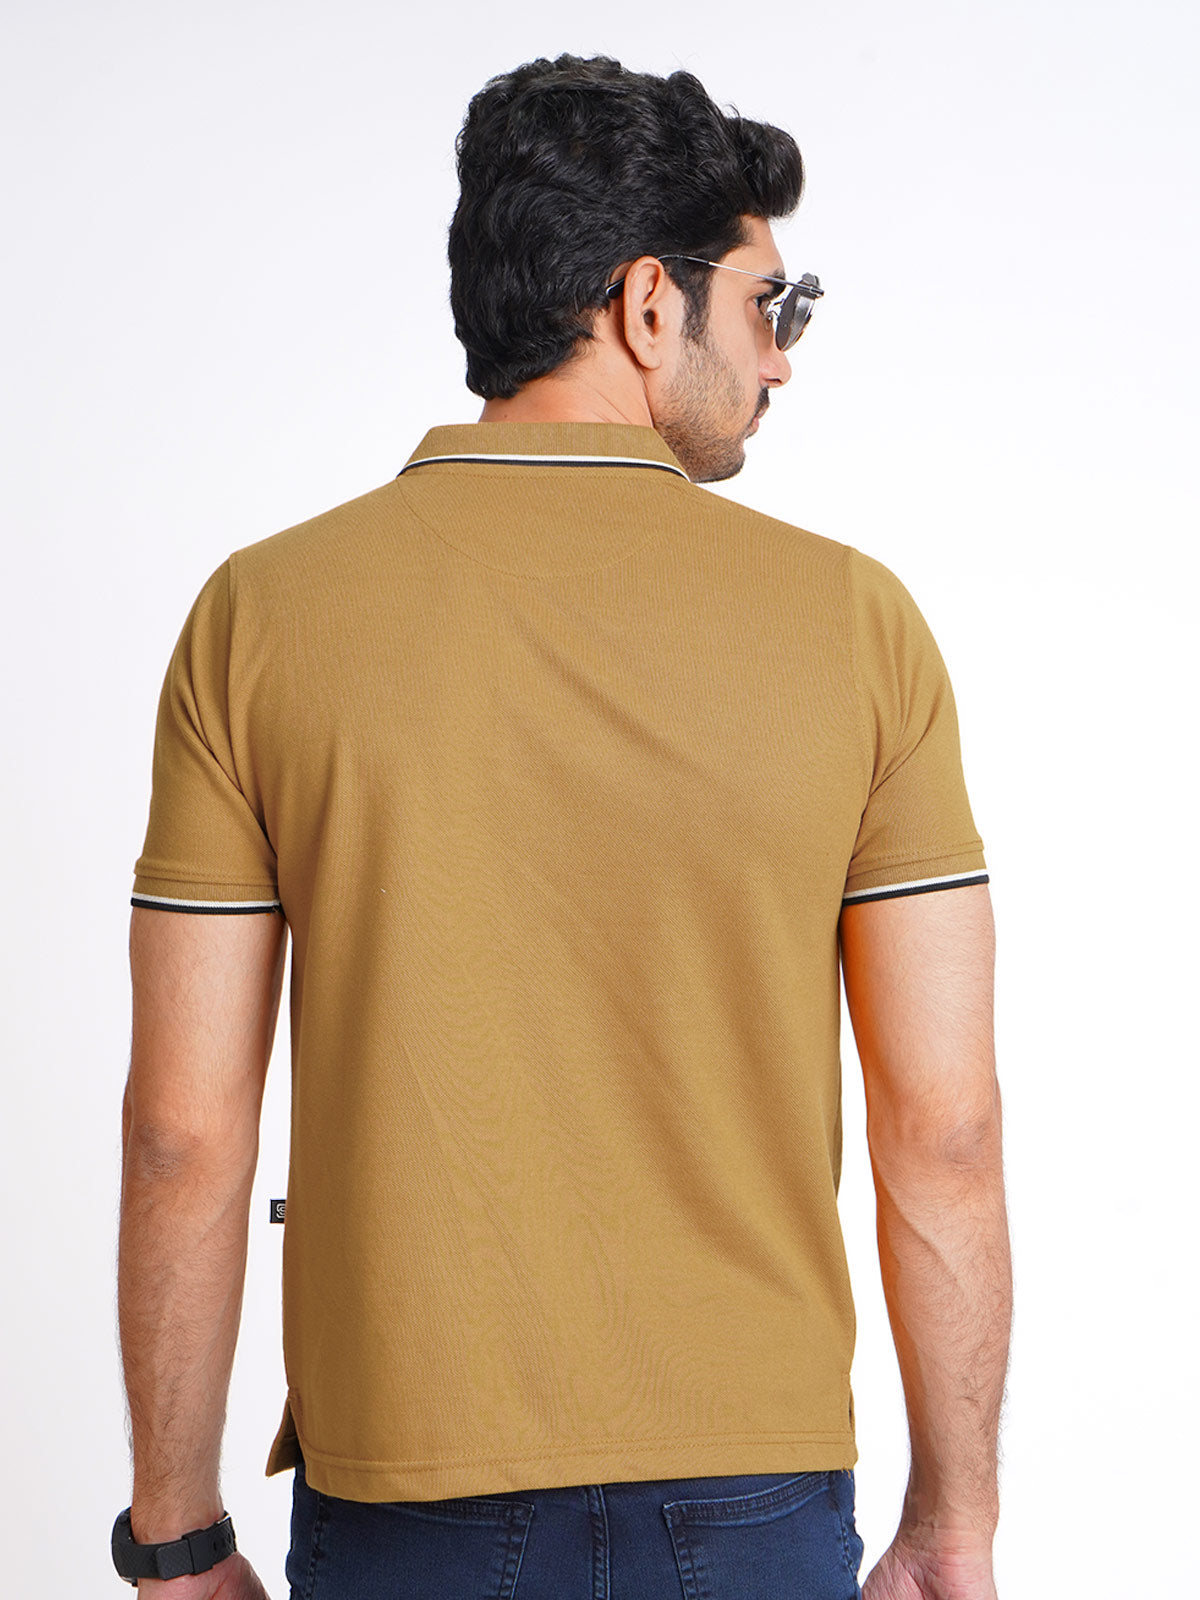 Mustard Plain Contrast Tipping Half Sleeves Polo T-Shirt (POLO-593)